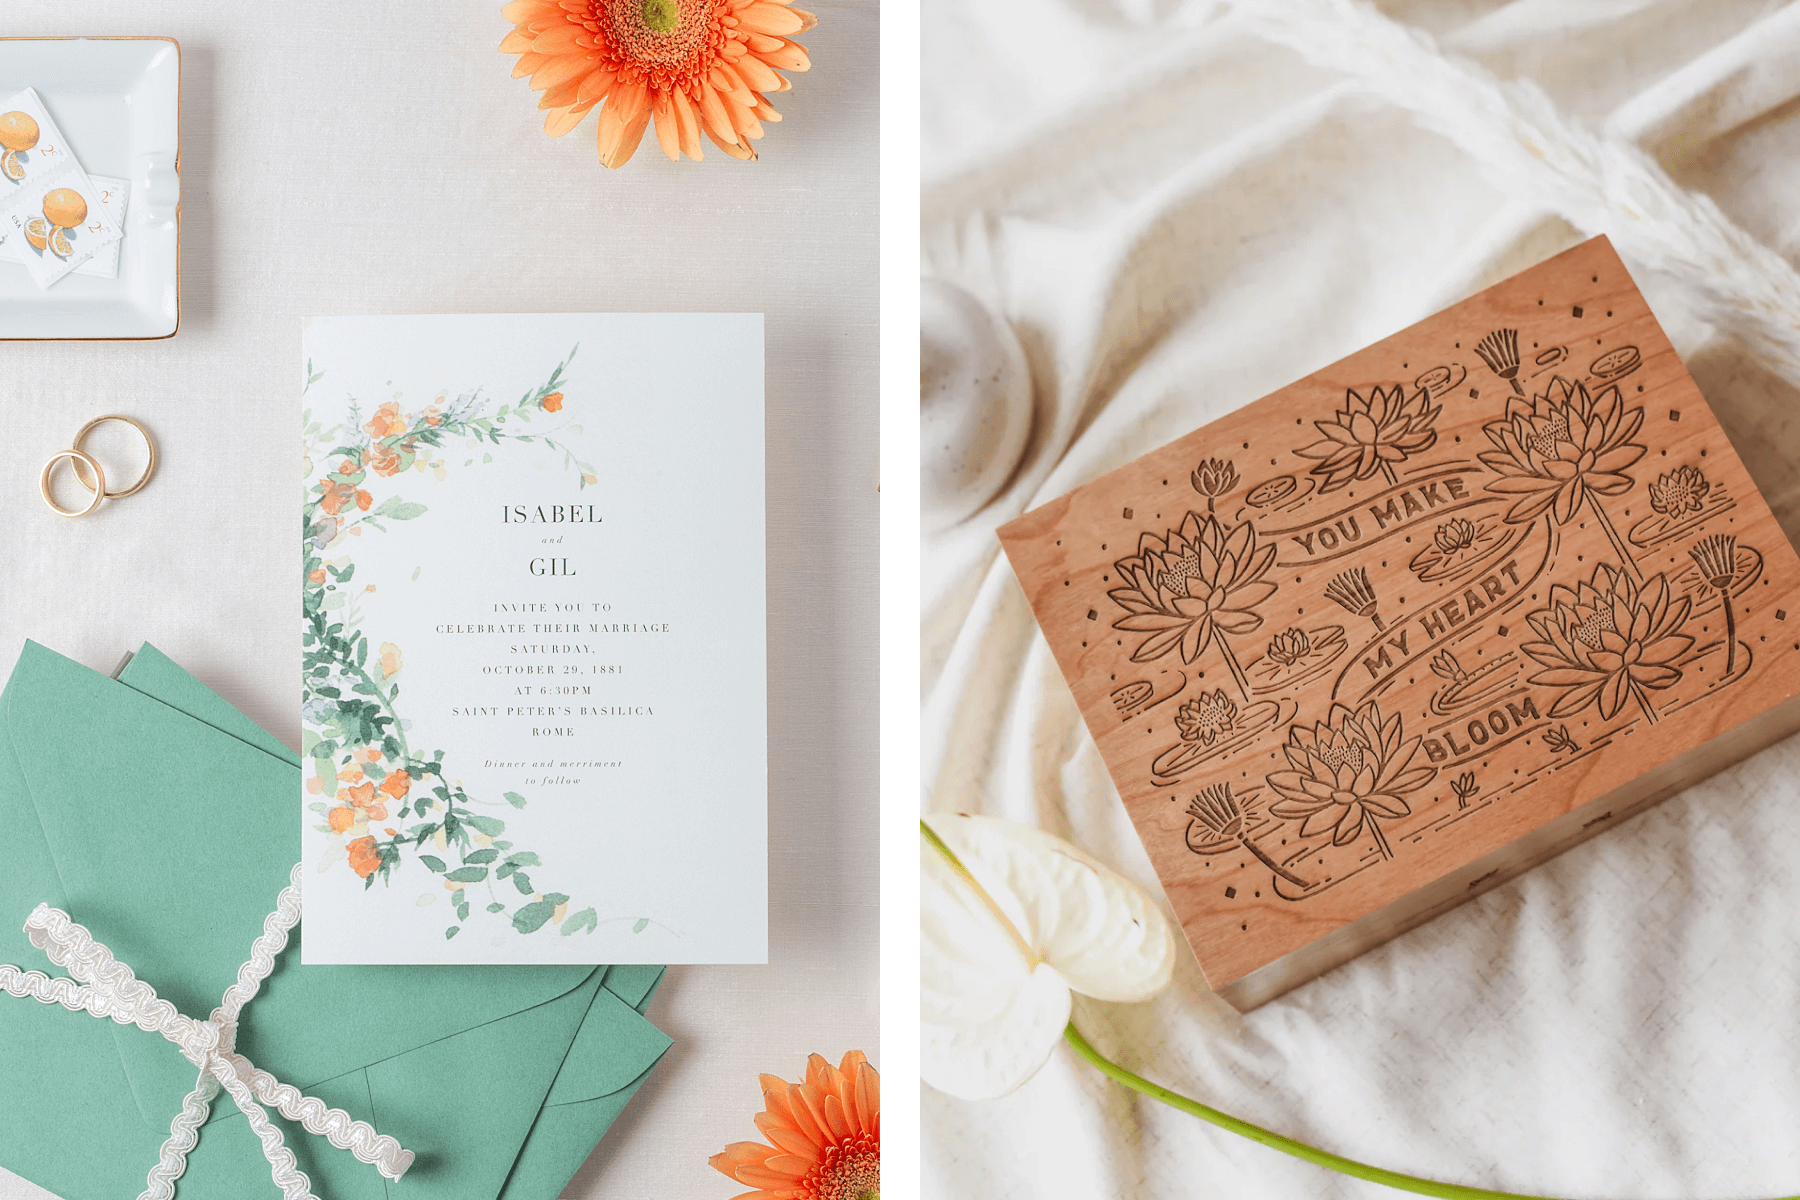 Left: A printed wedding invitation featuring a watercolor illustration of greenery and orange flowers sits on top of a stack of green envelopes wrapped in white ribbon. Right: A wooden keepsake box with designs engraved in the lid, including the words "You make my heart bloom." 